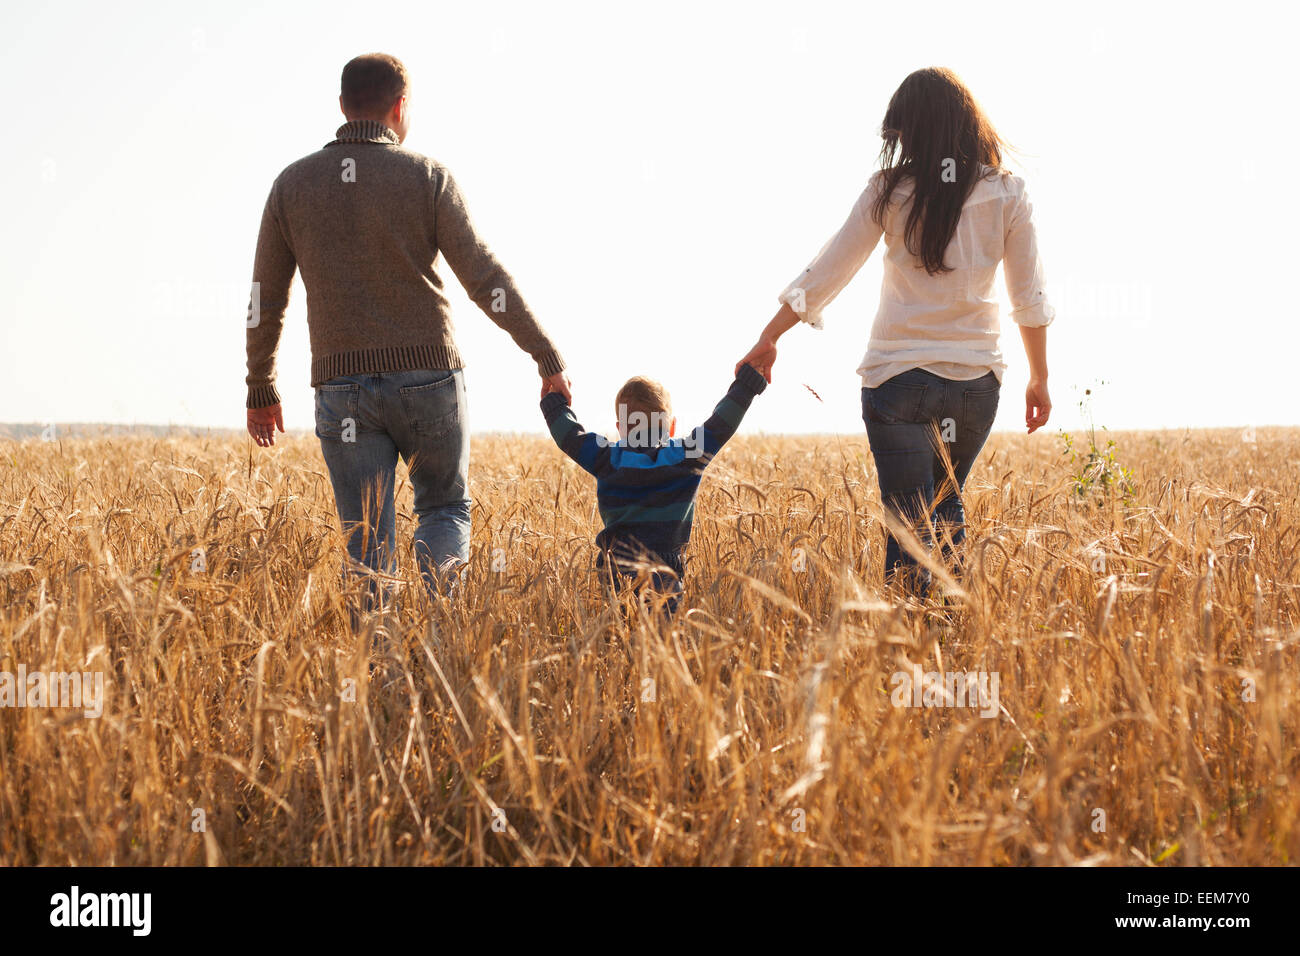 Caucasian family walking in rural field Banque D'Images